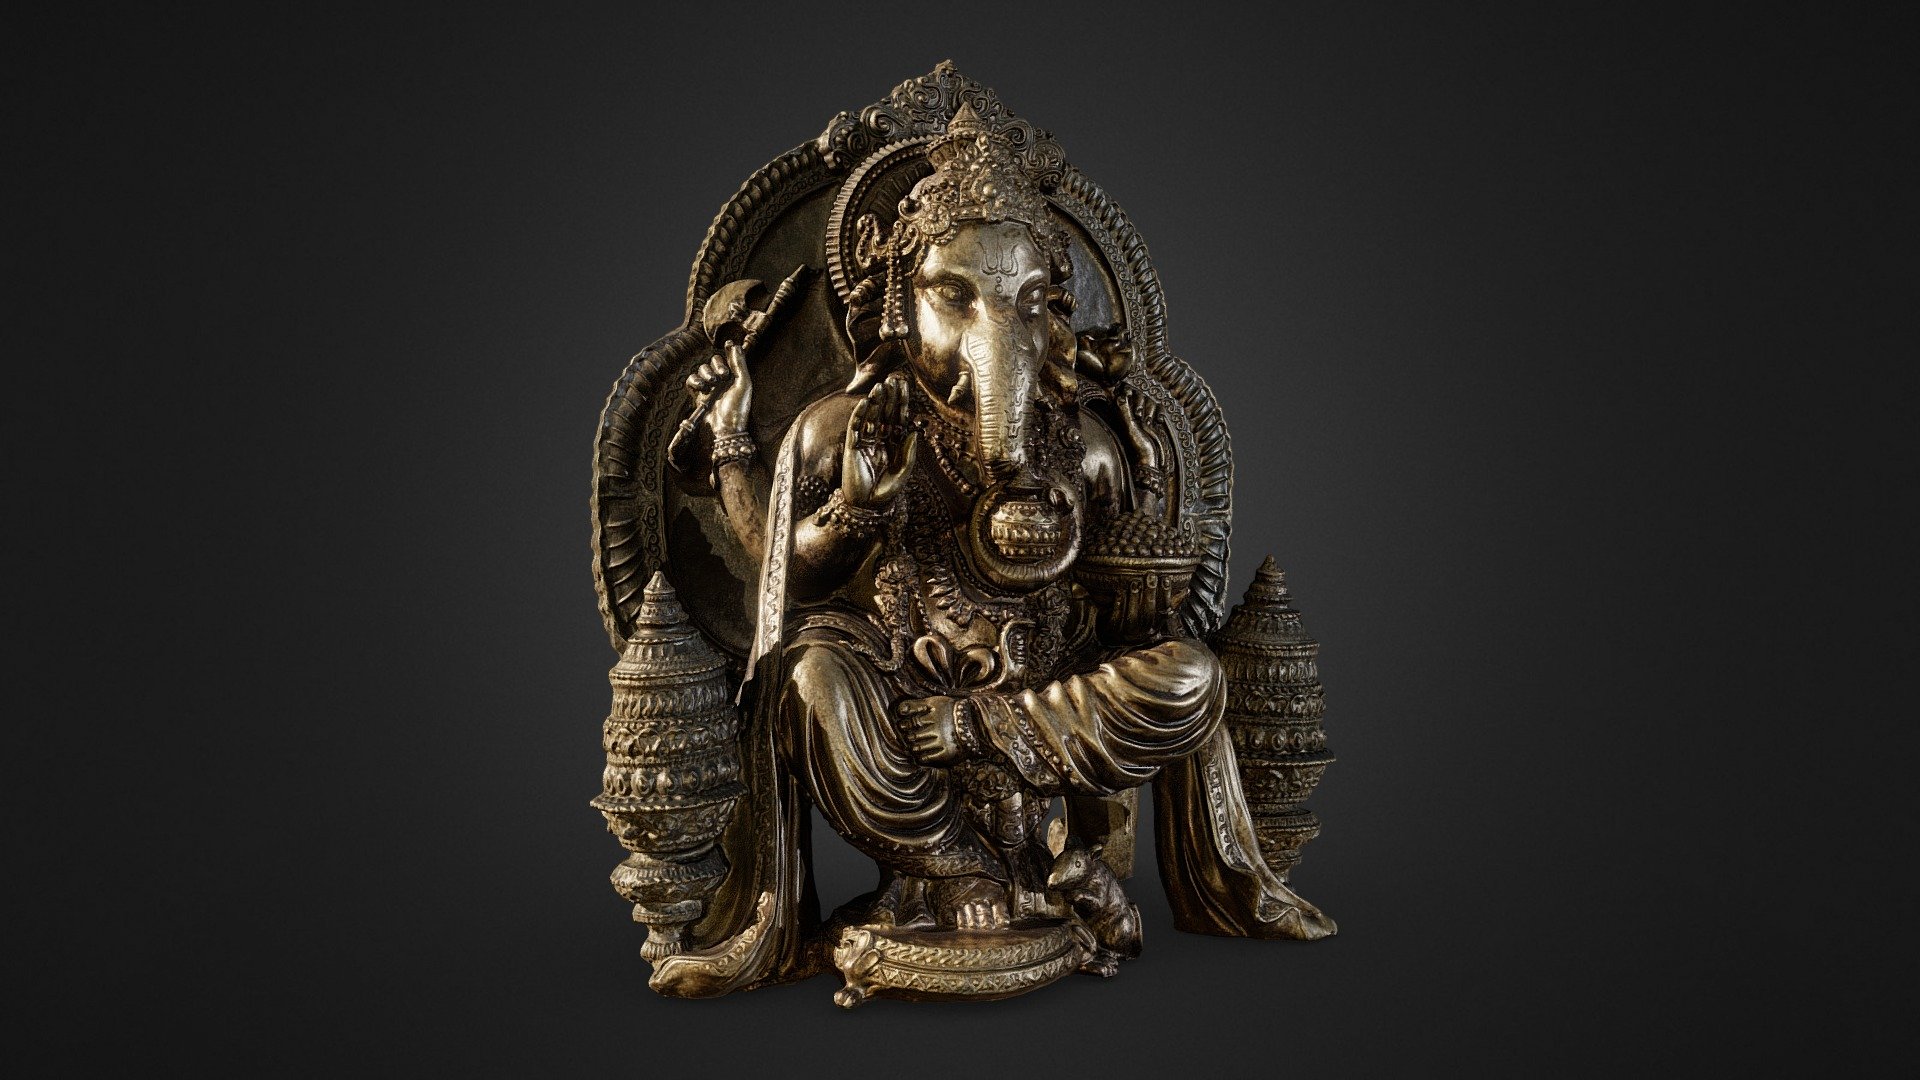 Epic Ganesha 

Captured using Quixel/Epic experimental rig with 4 cross-polarized lights and 100 MP camera

Processed using advanced technology developed by inciprocal Inc. that enables highly photo-realistic reproduction of real-world products in virtual environments. Our hardware and software technology combines advanced photometry, structured light, photogrammtery and light fields to capture and generate accurate material representations from tens of thousands of images targeting real-time and offline path-traced PBR compatible renderers 3d model